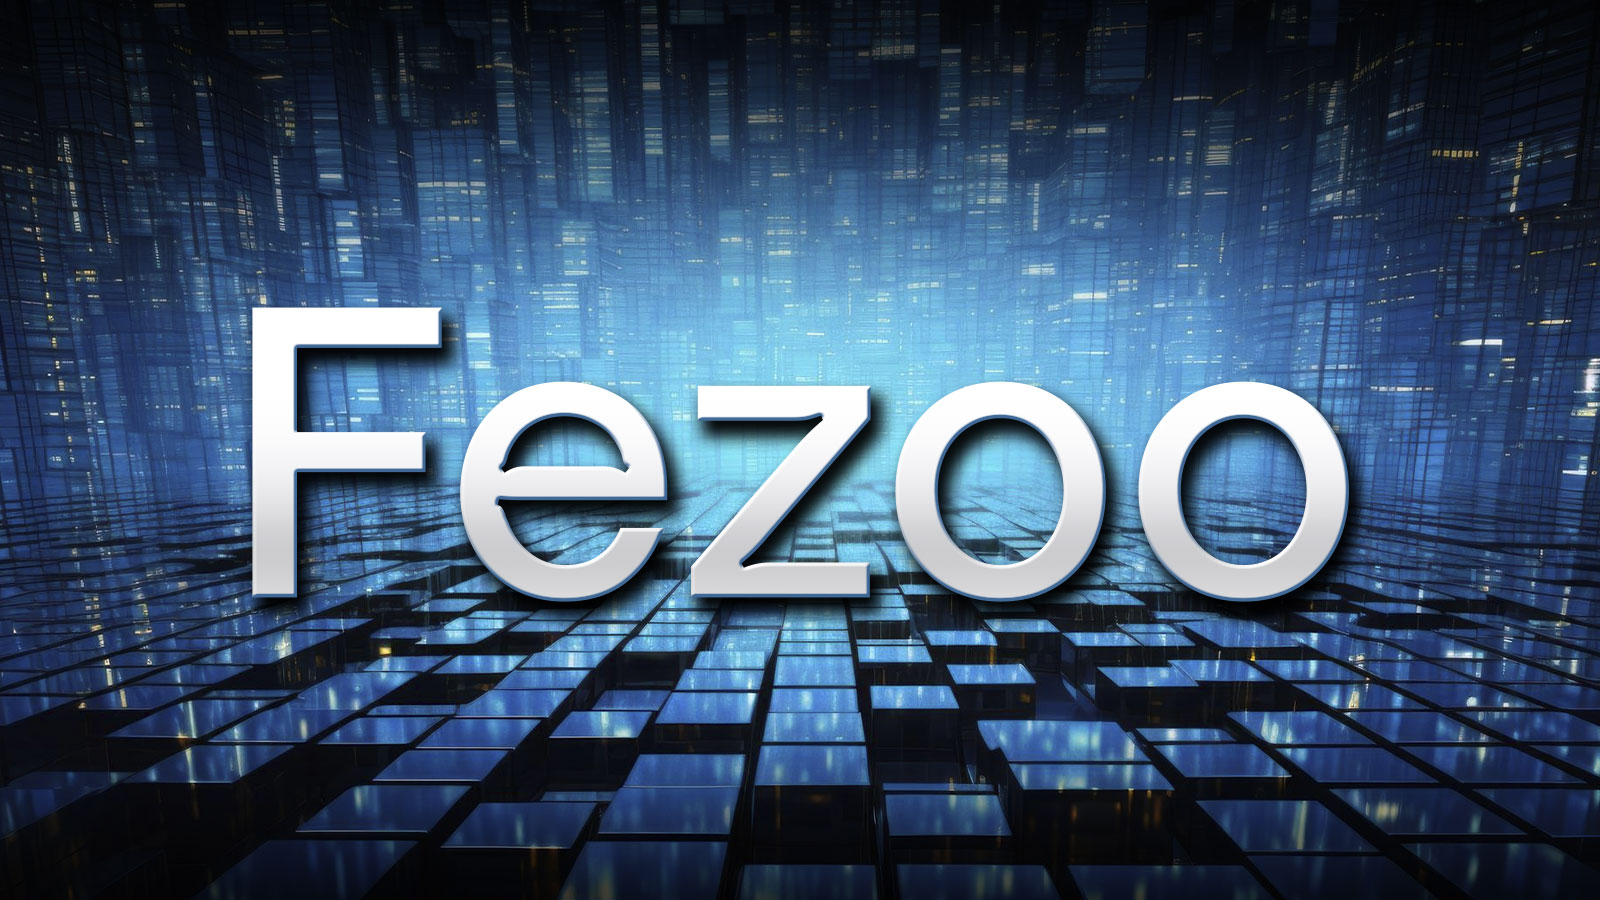 Fezoo (FEZ) Token Pre-Sale Gaining Traction in Late April as Bitcoin Cash (BCH), Ethereum Classic (ETH) Major Altcoins Target New Trading Volume Highs